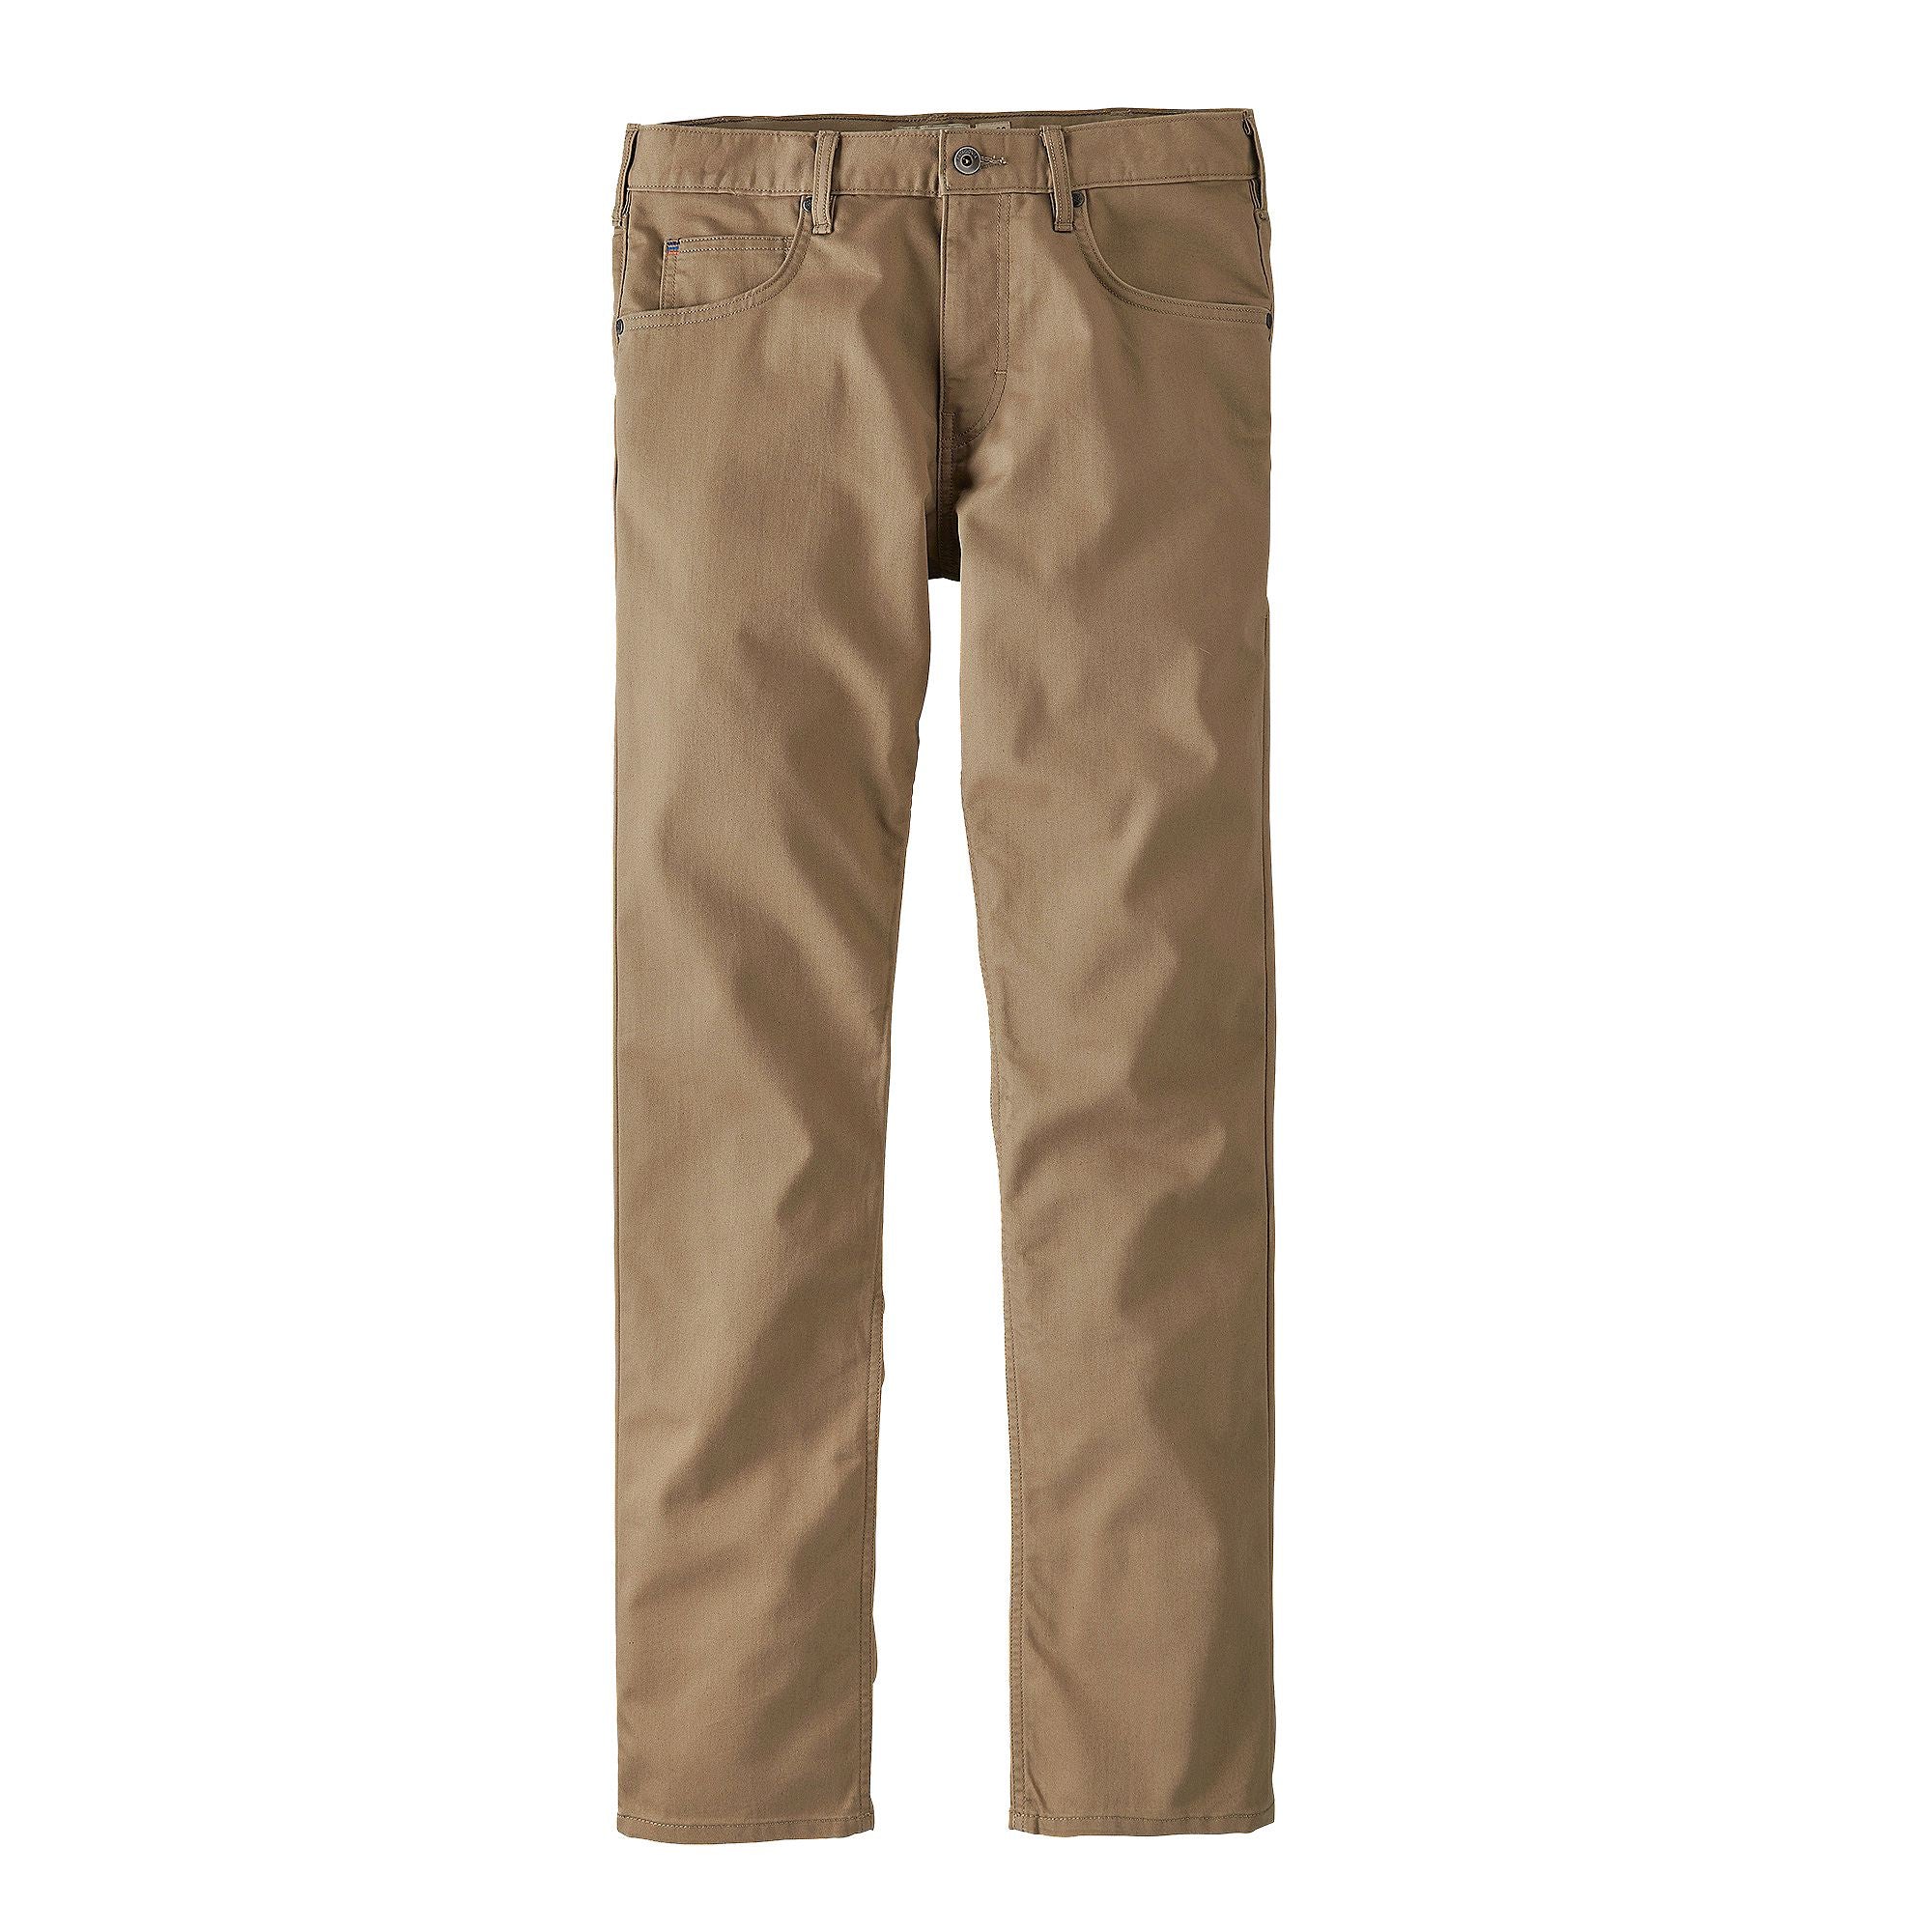 Patagonia Men's Performance Twill Jeans/Mojave Khaki - Andy Thornal Company